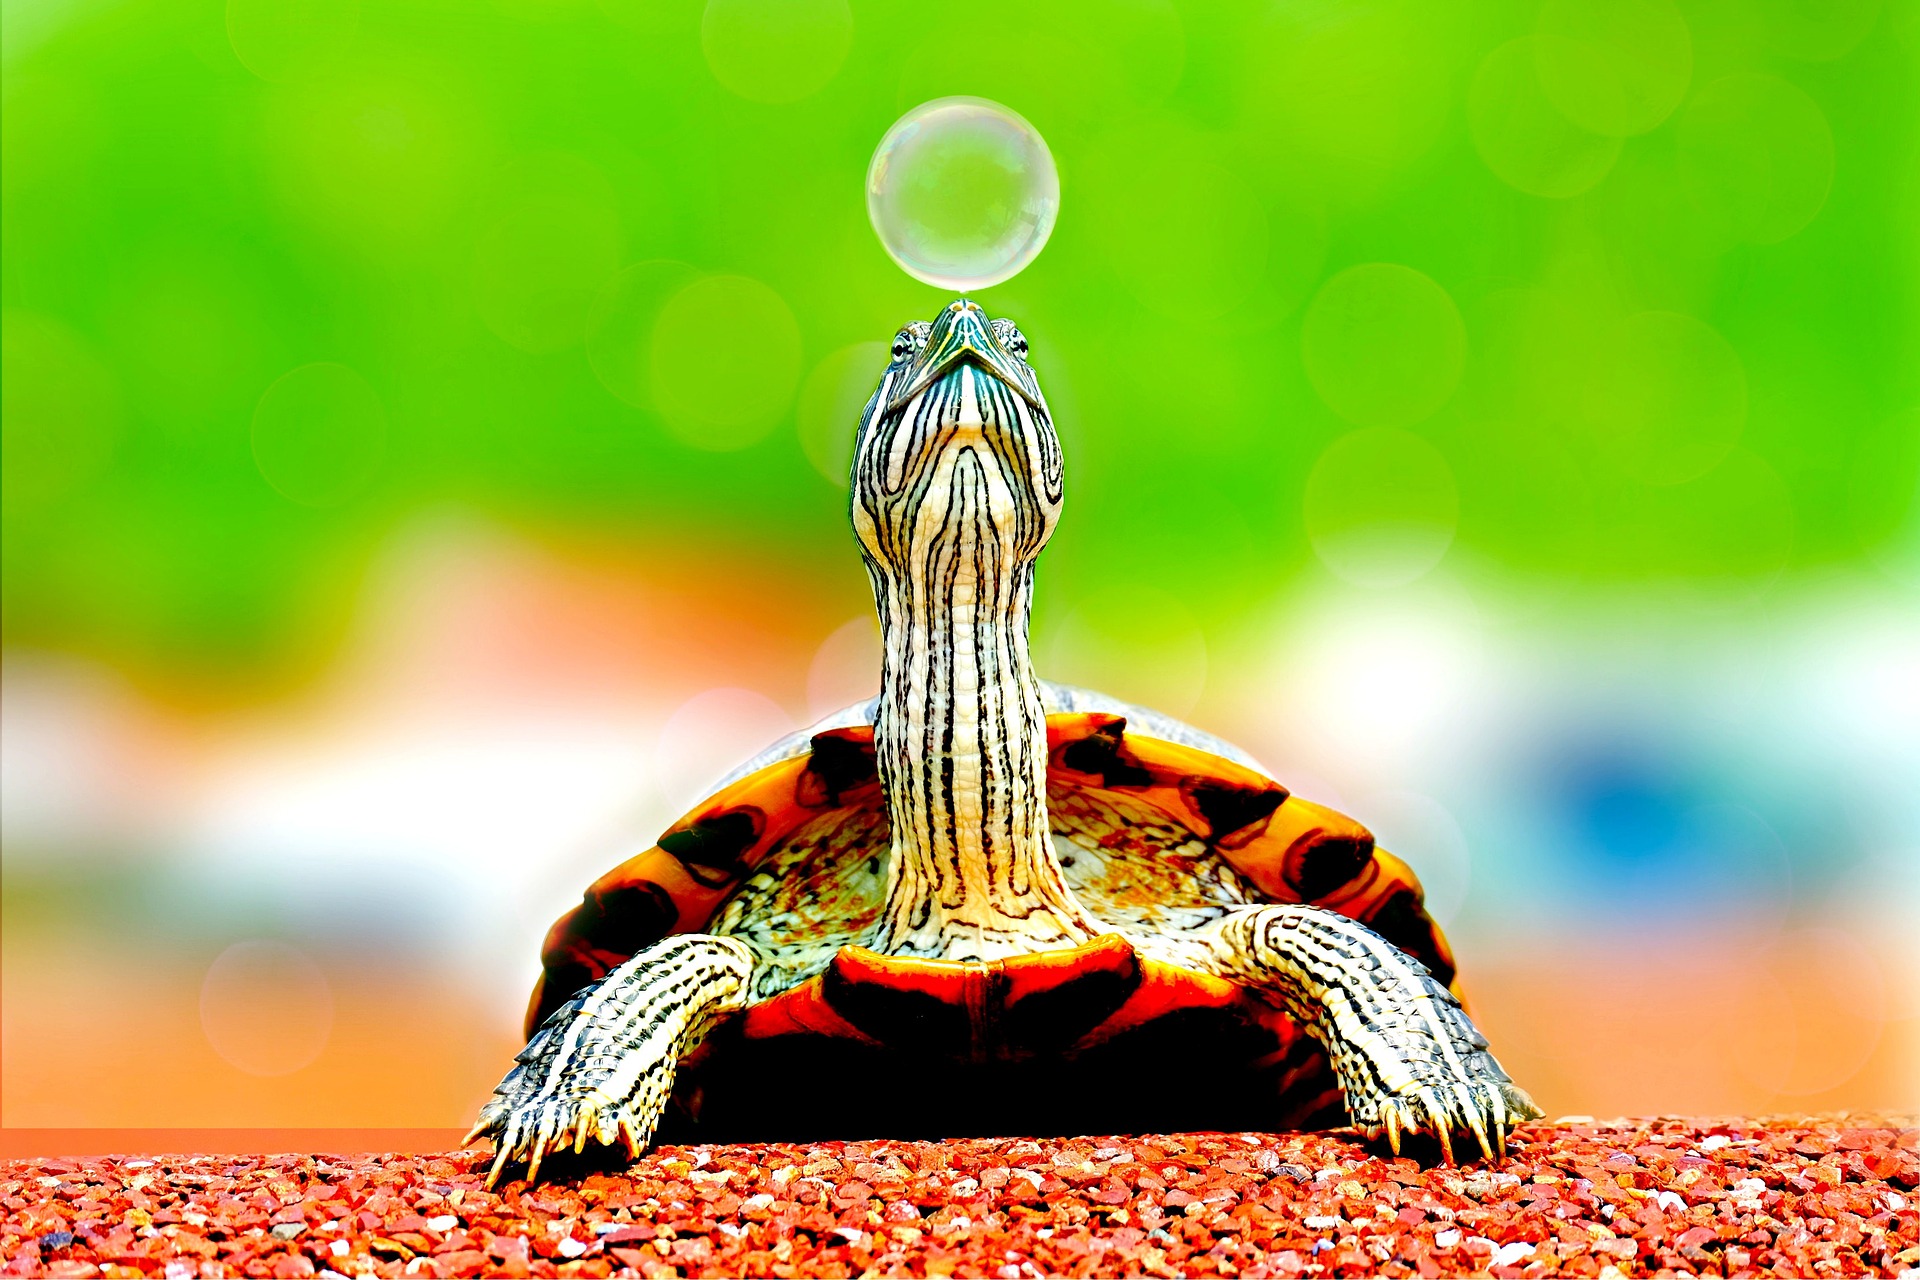 A turtle stretches its neck to look at a bubble.